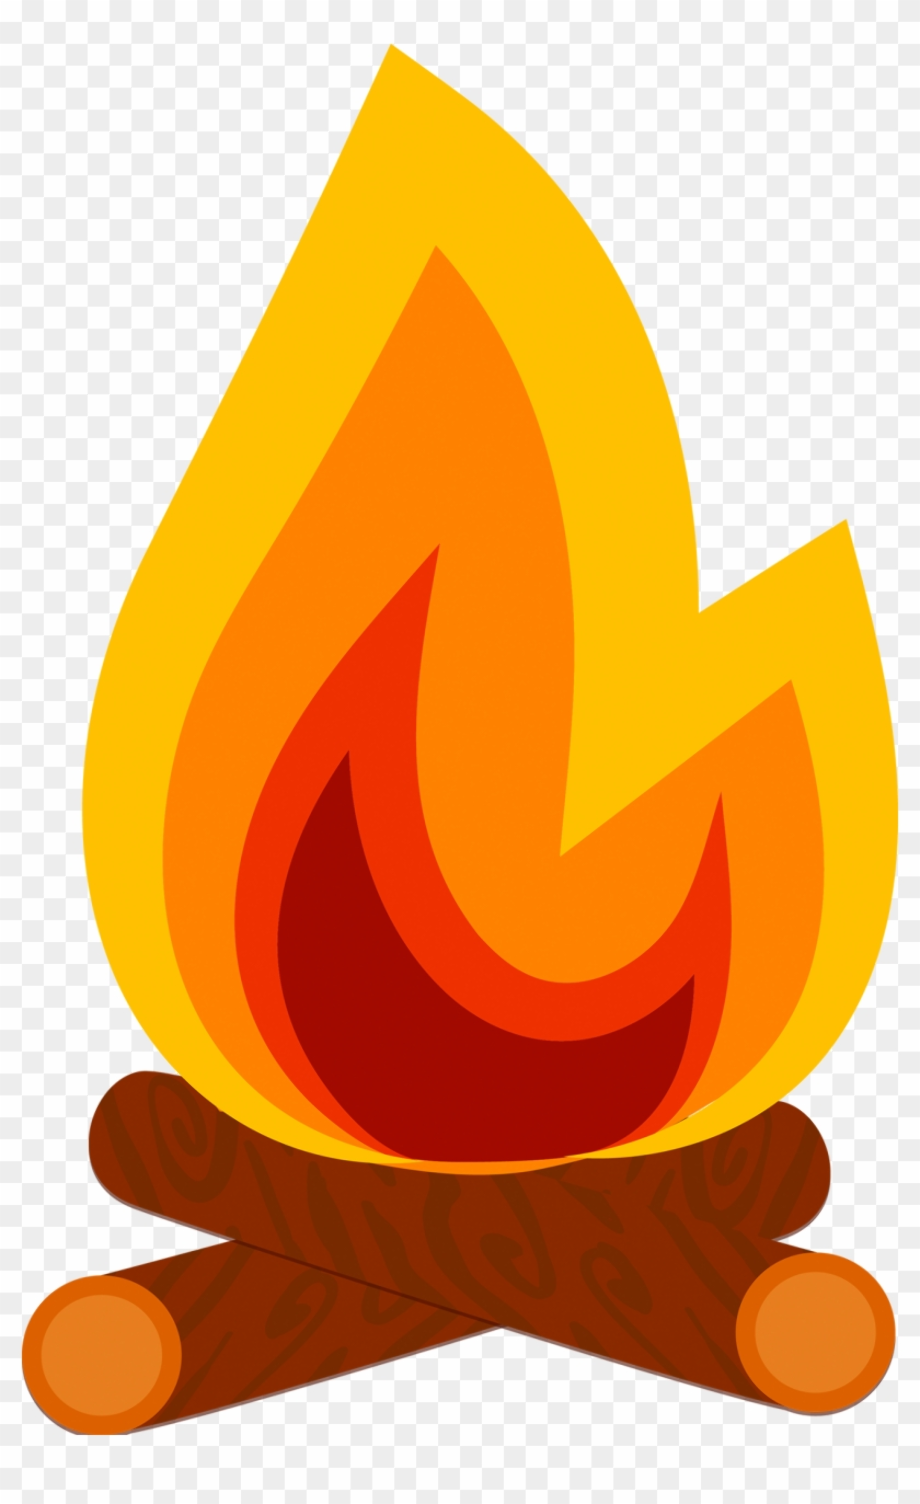 Download High Quality campfire clipart realistic Transparent PNG Images